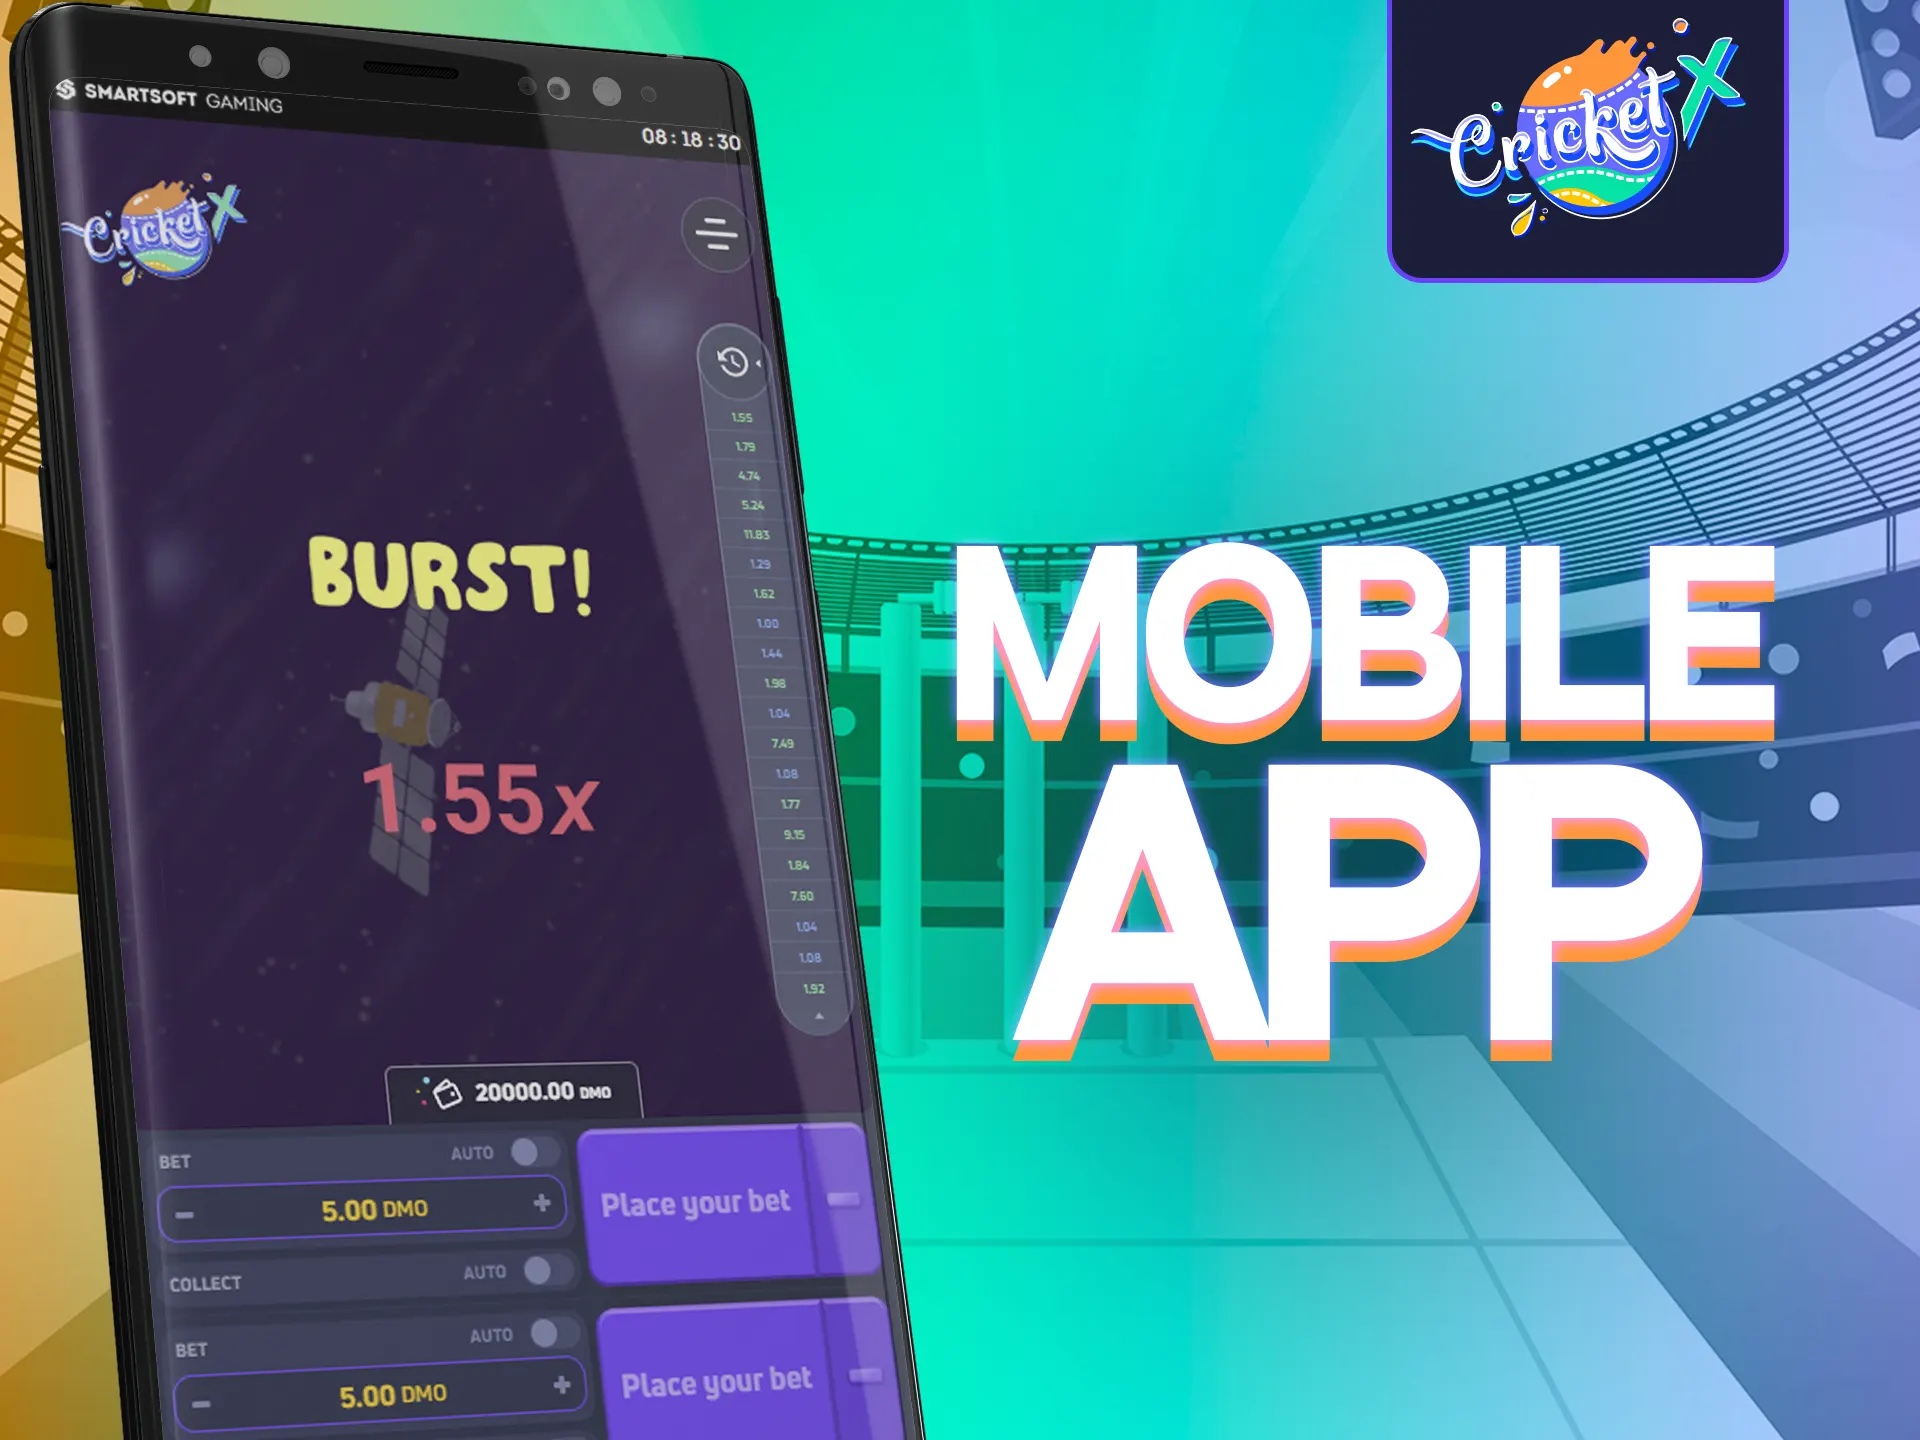 Mobile App giving for CricketX game players more opportunities to play.